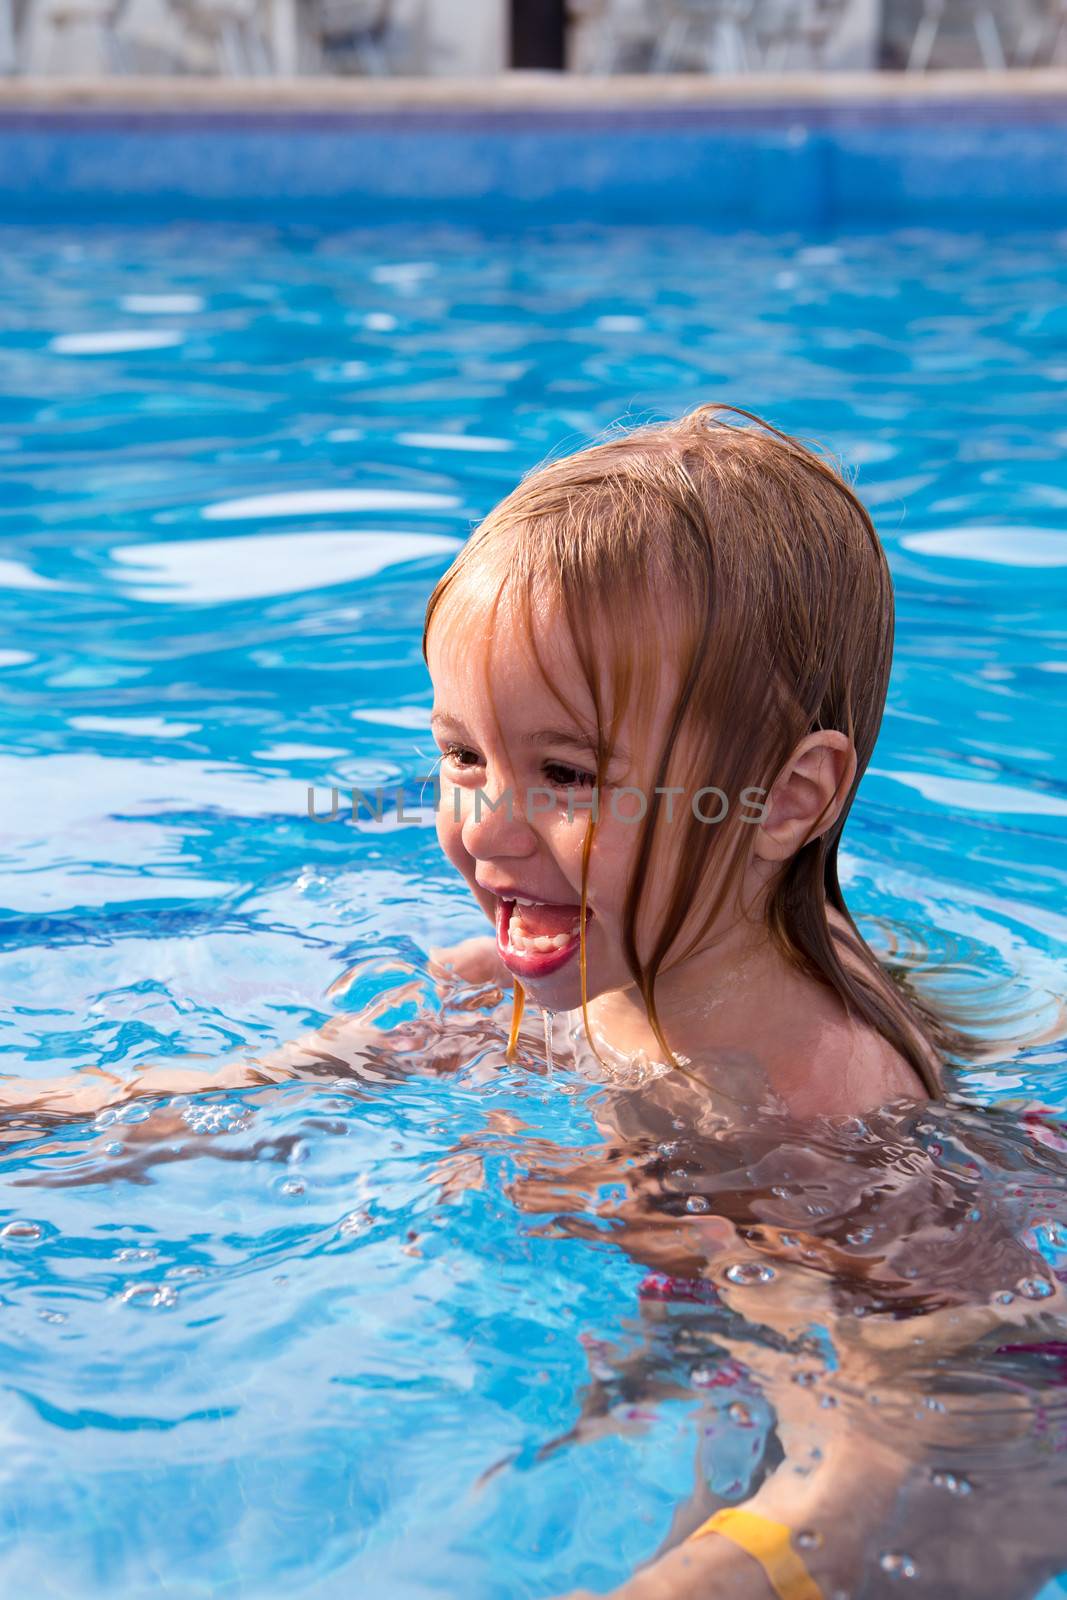 Toddler Learning How to Swim by coskun